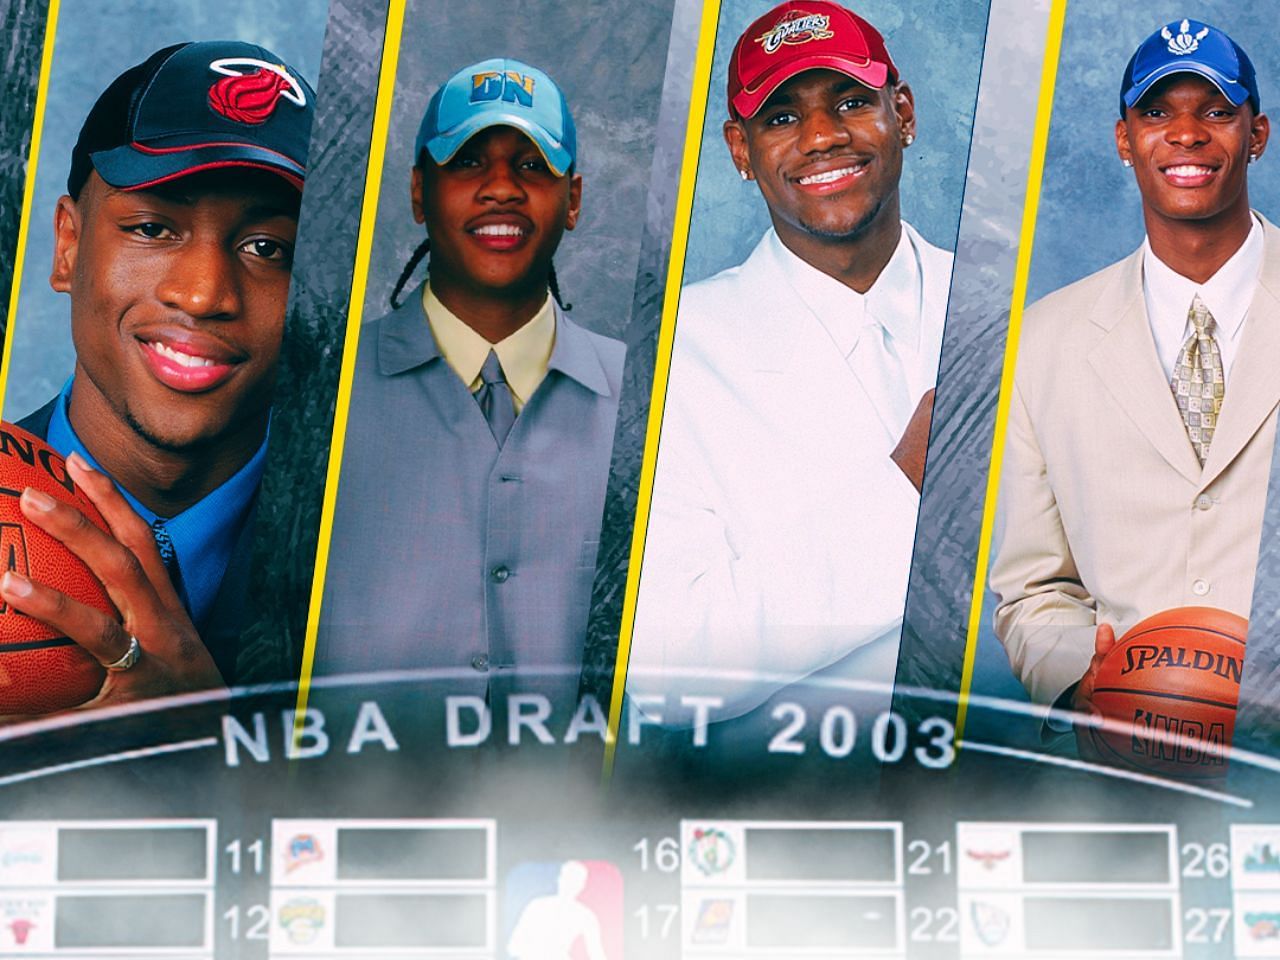 How LeBron James, Carmelo Anthony and the 2003 draft class